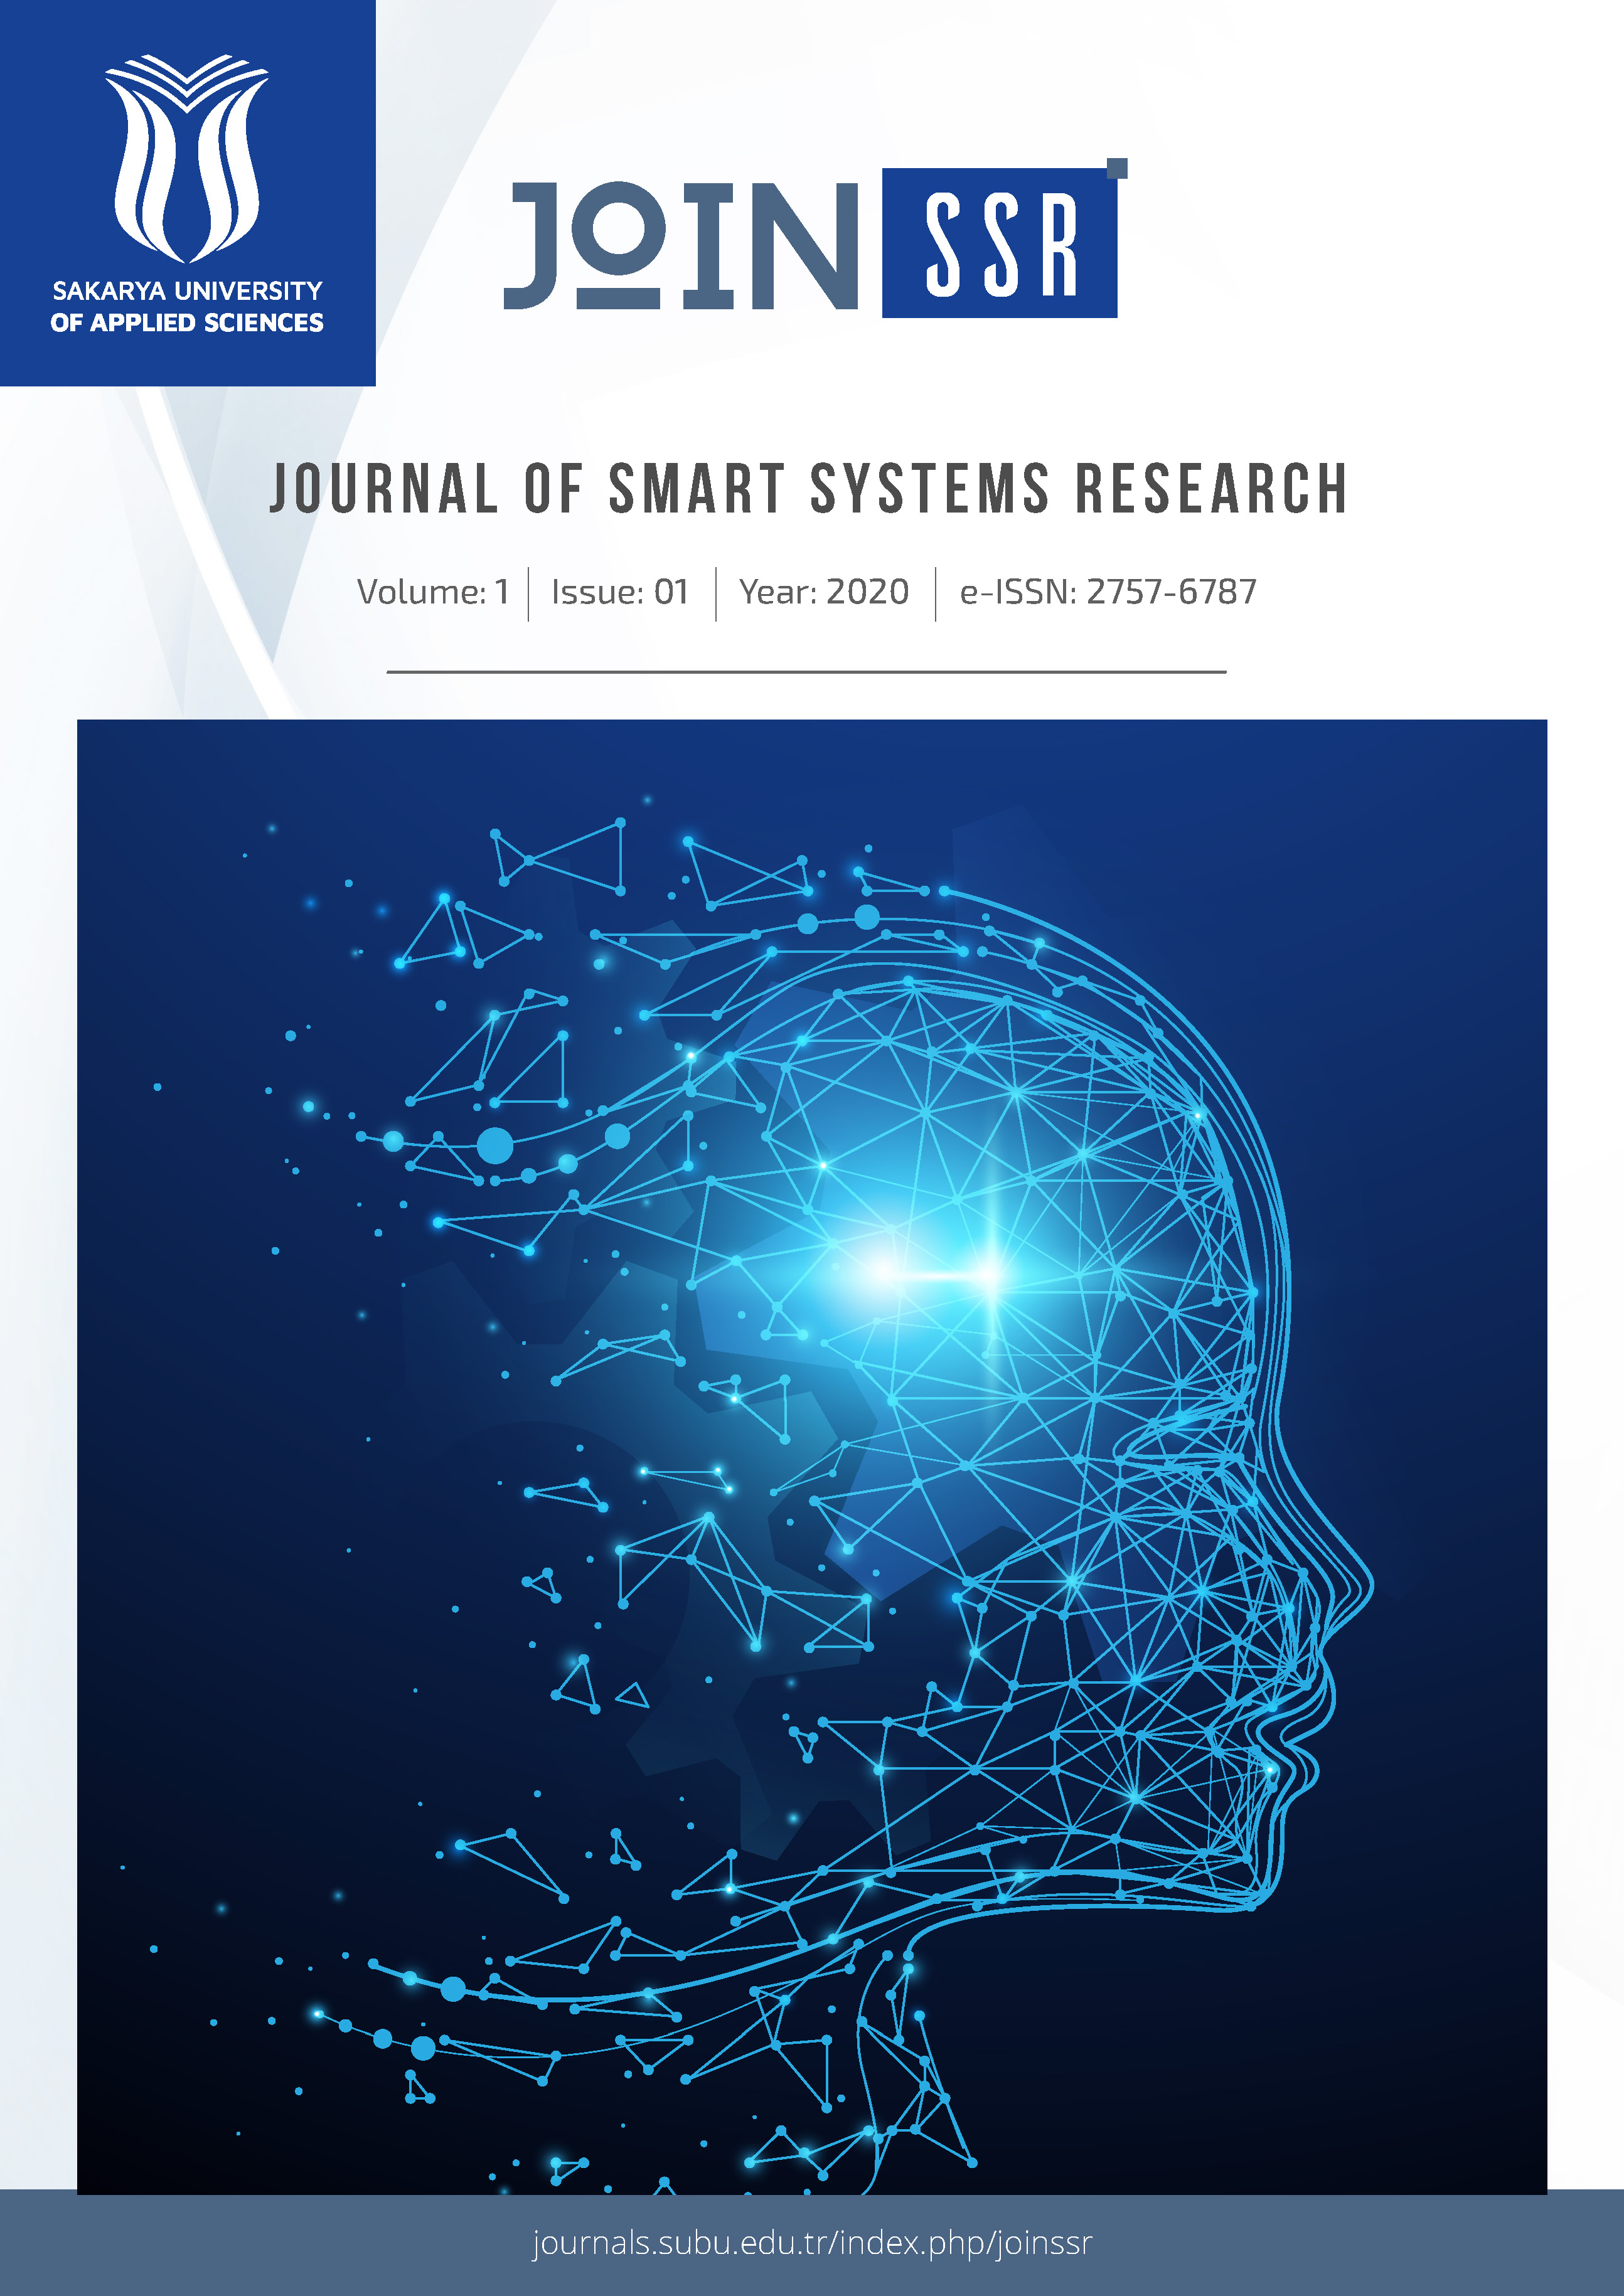 JOURNAL OF SMART SYSTEMS RESEARCH